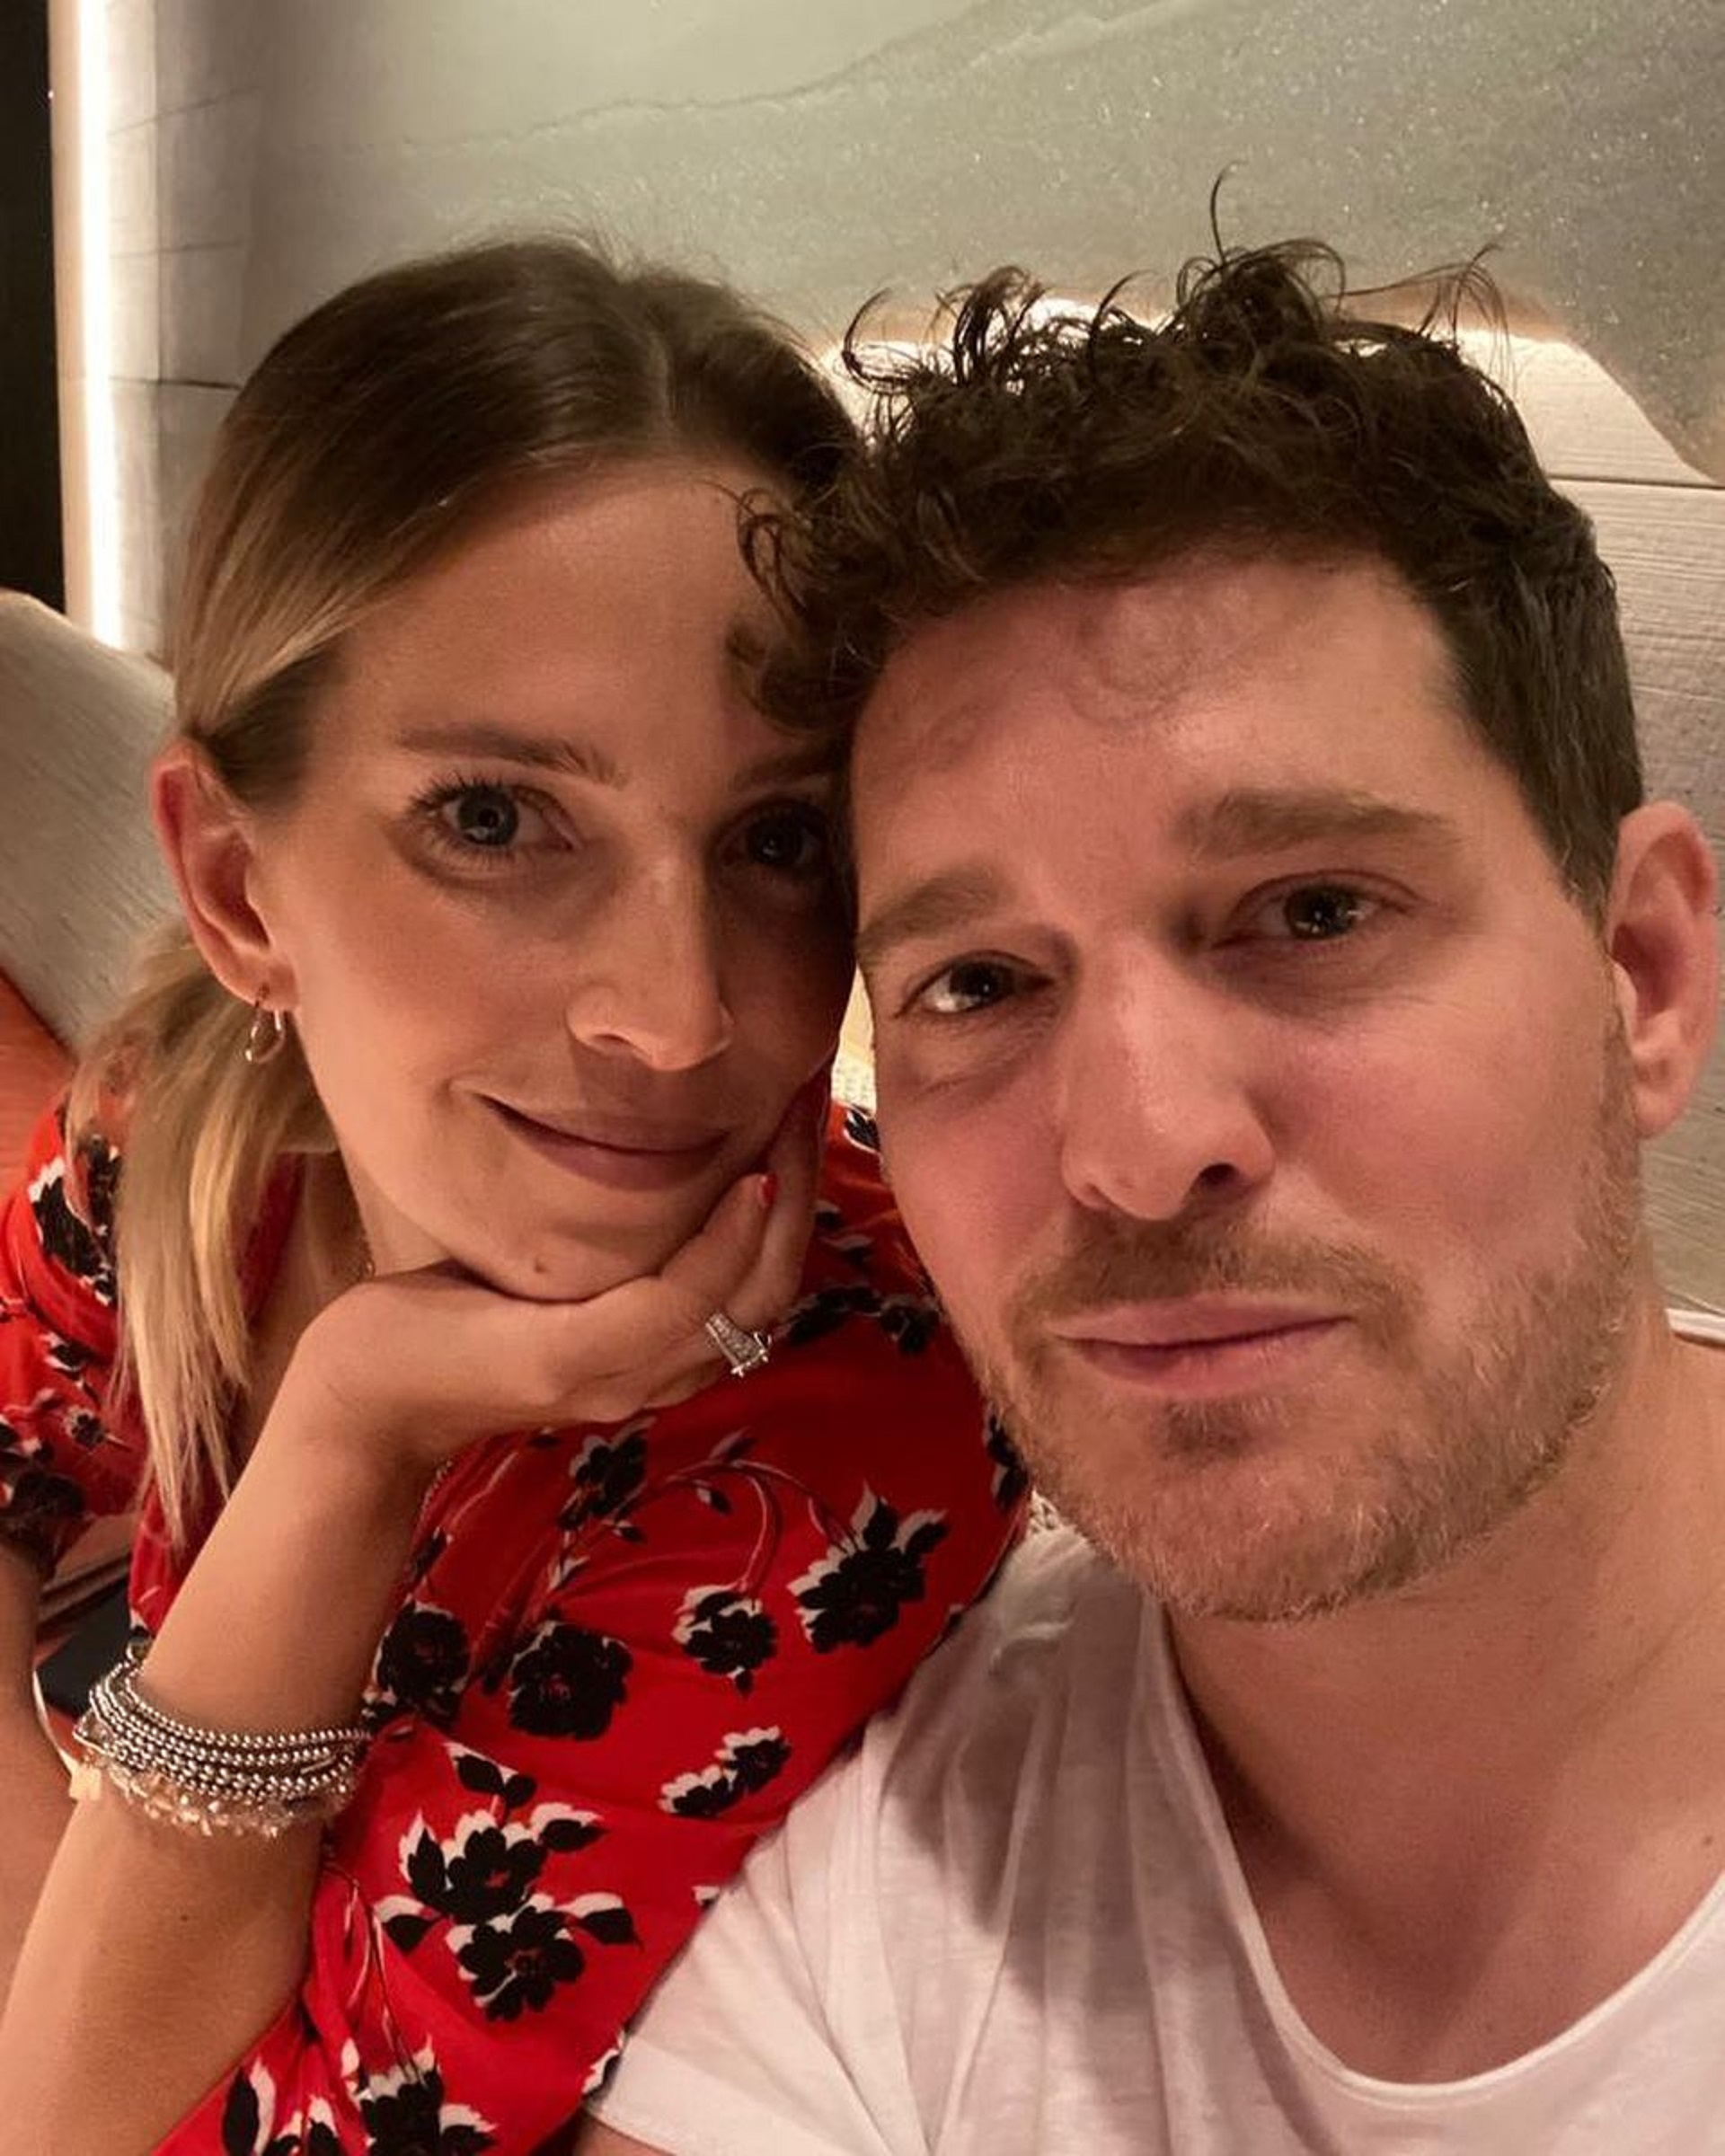 Luisana Lopilato and Michael Bublé are parents to Noah, Elías, Vida and are expecting their fourth baby